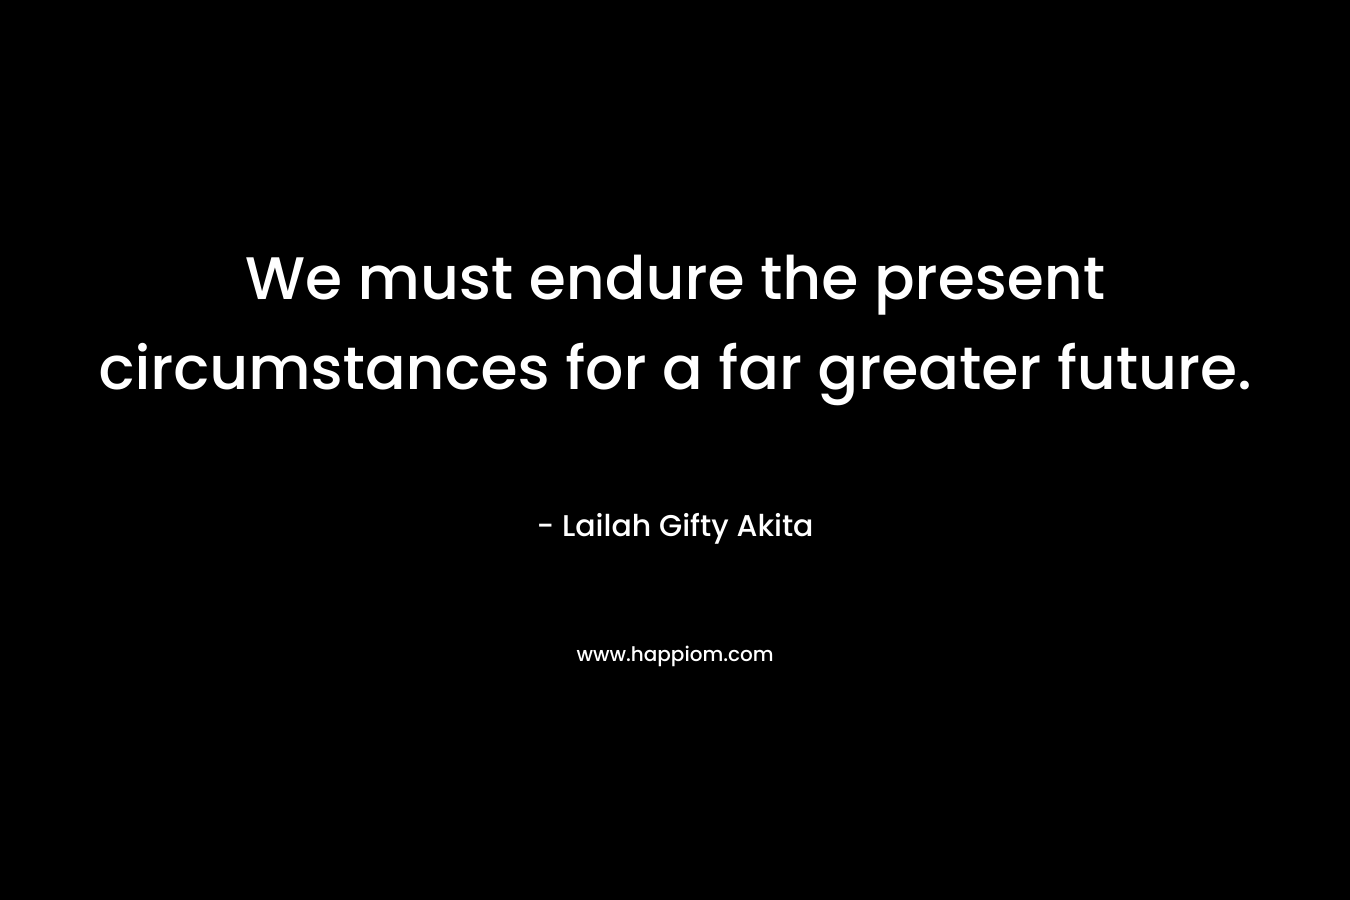 We must endure the present circumstances for a far greater future.